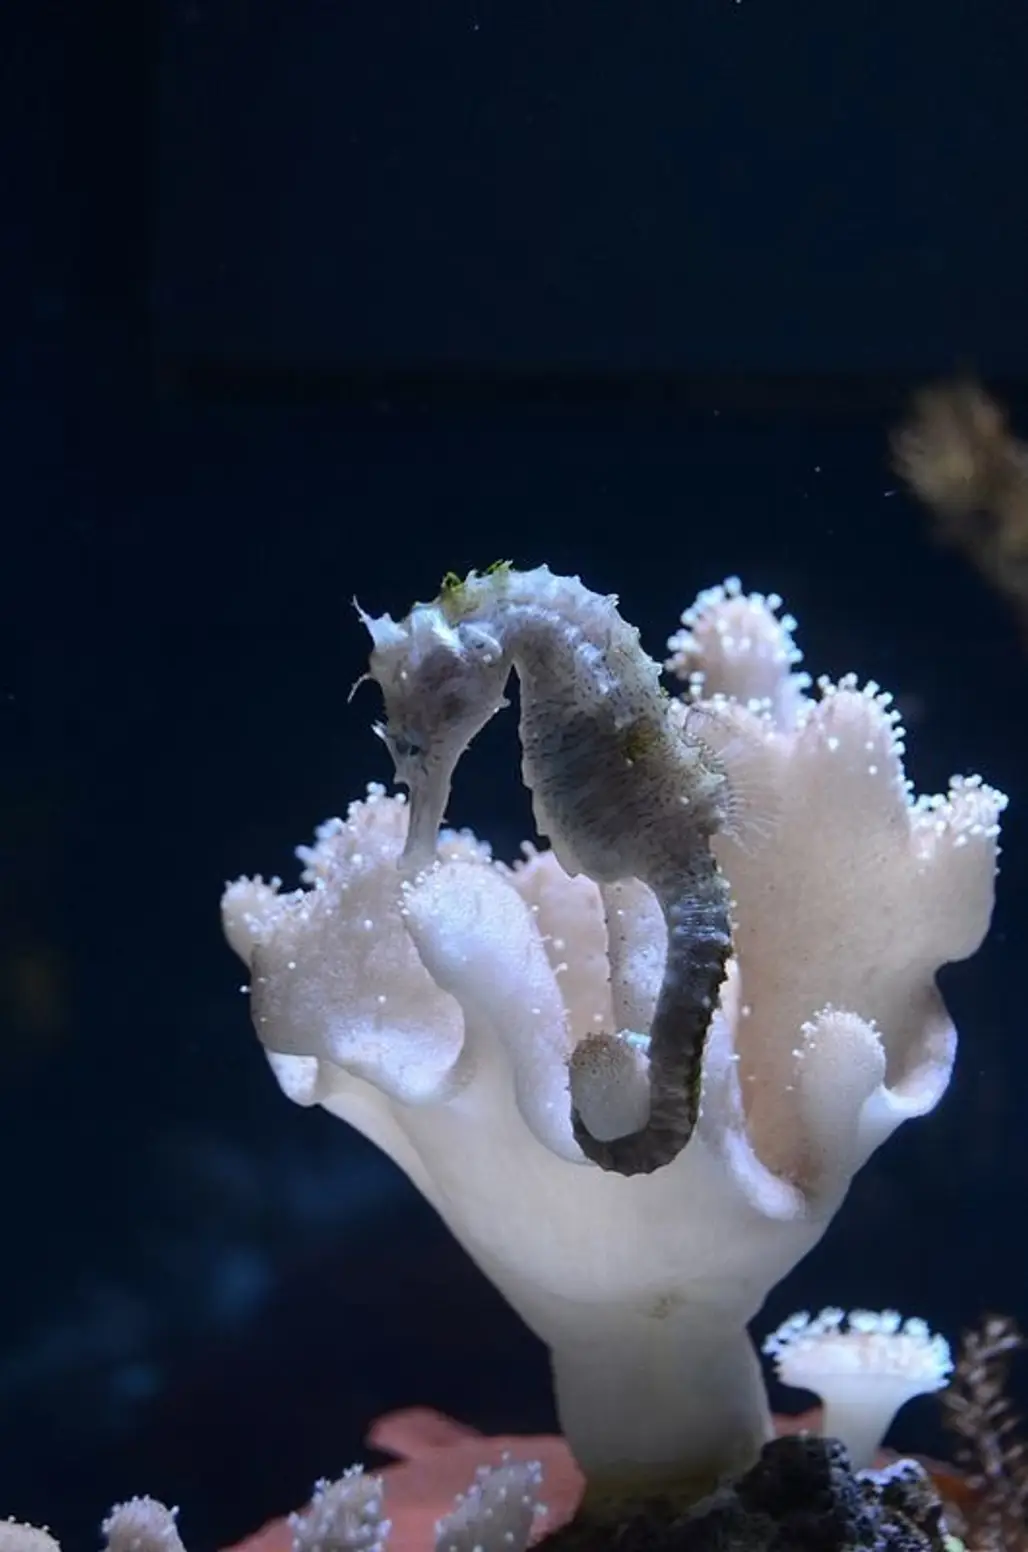 Another Seahorse